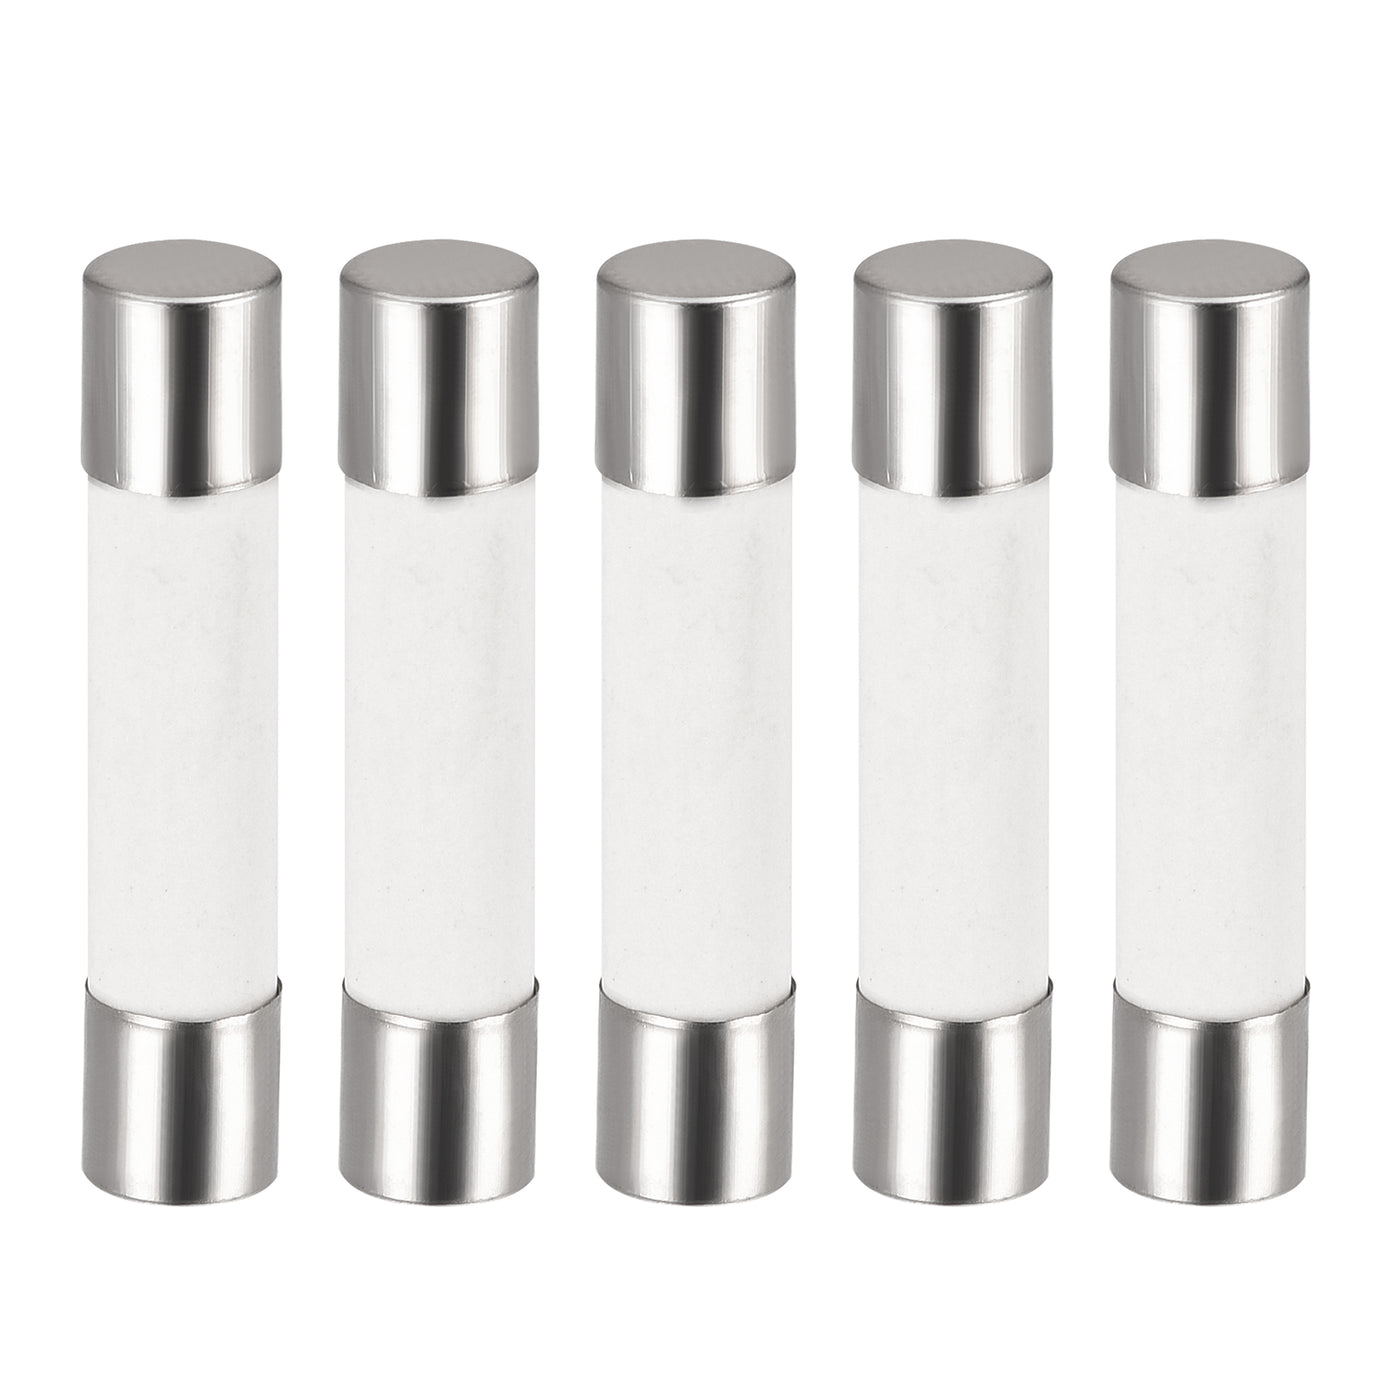 uxcell Uxcell Ceramic Cartridge Fuses 1.5A 250V 6x30mm Fast Blow for Energy Saving Lamp 5pcs